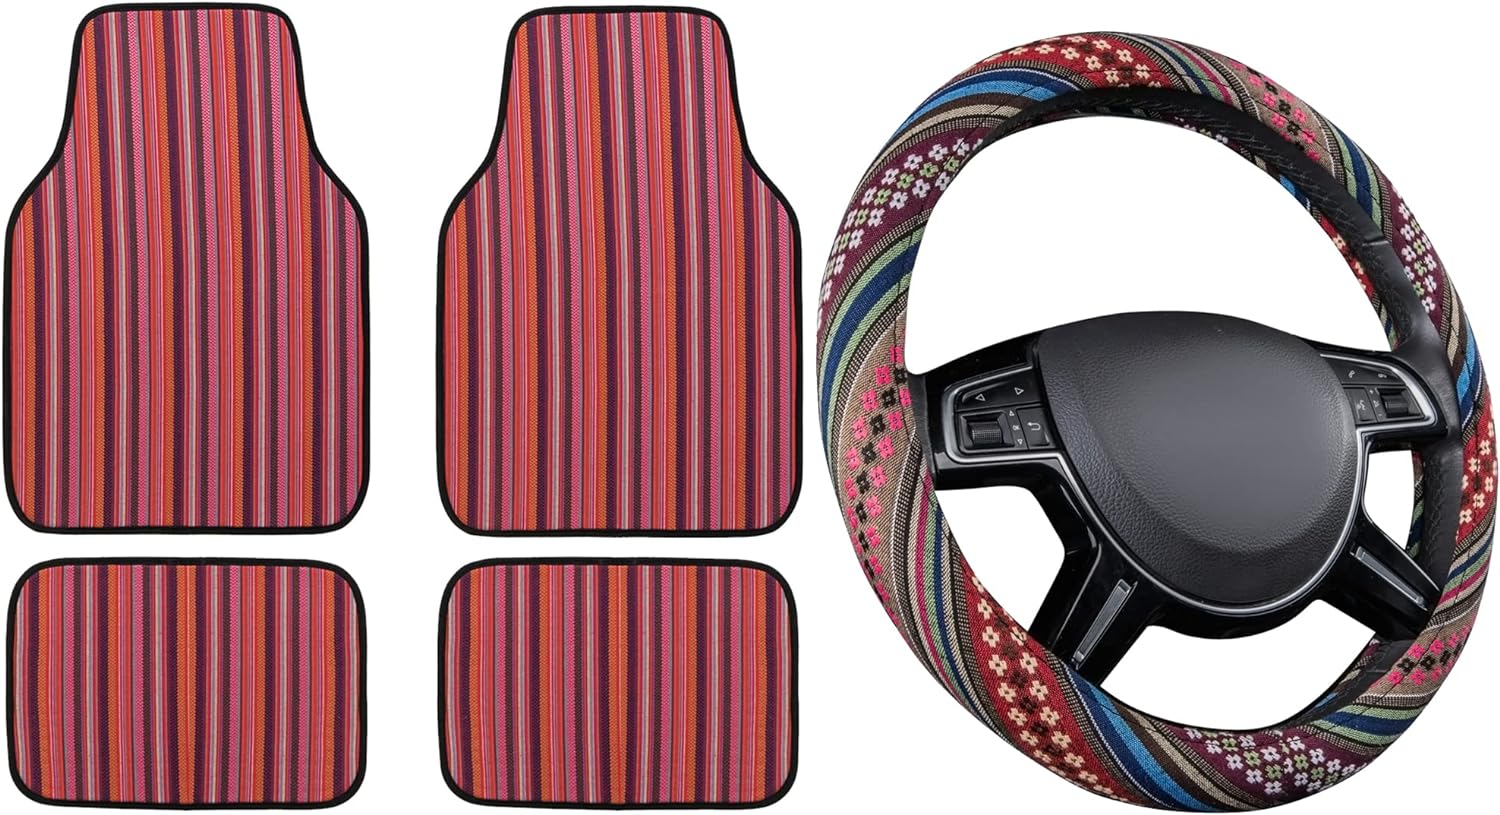 CAR PASS Rainbow Ethnic Car Floor Mats Boho Steering Wheel Cover,Anti-Slip, fit for Most suvs,sedans,Trucks,sedans(Four Floor Mats,Steering Wheel Cover)